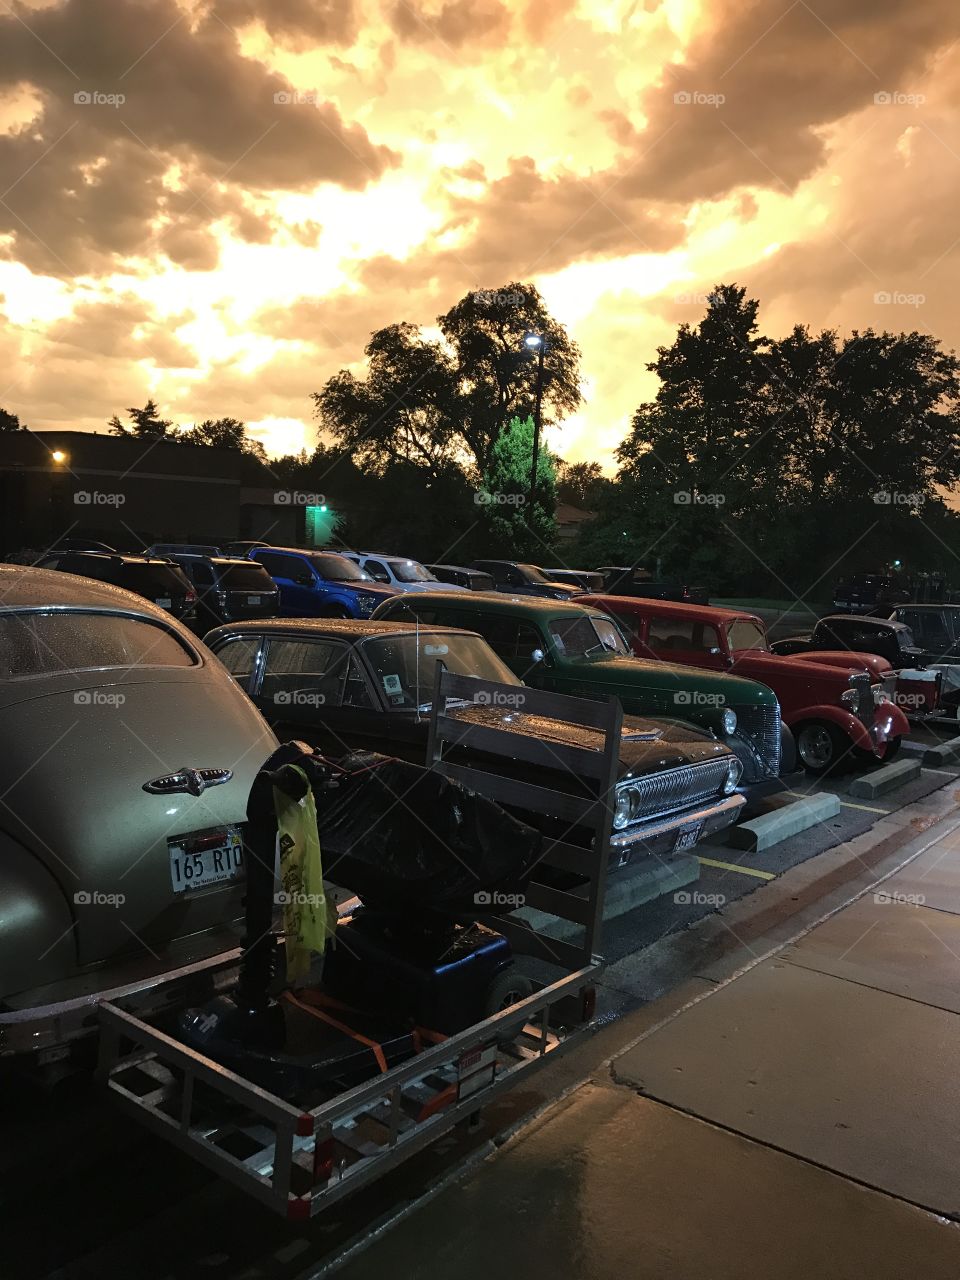 Classic cars during a spring storm